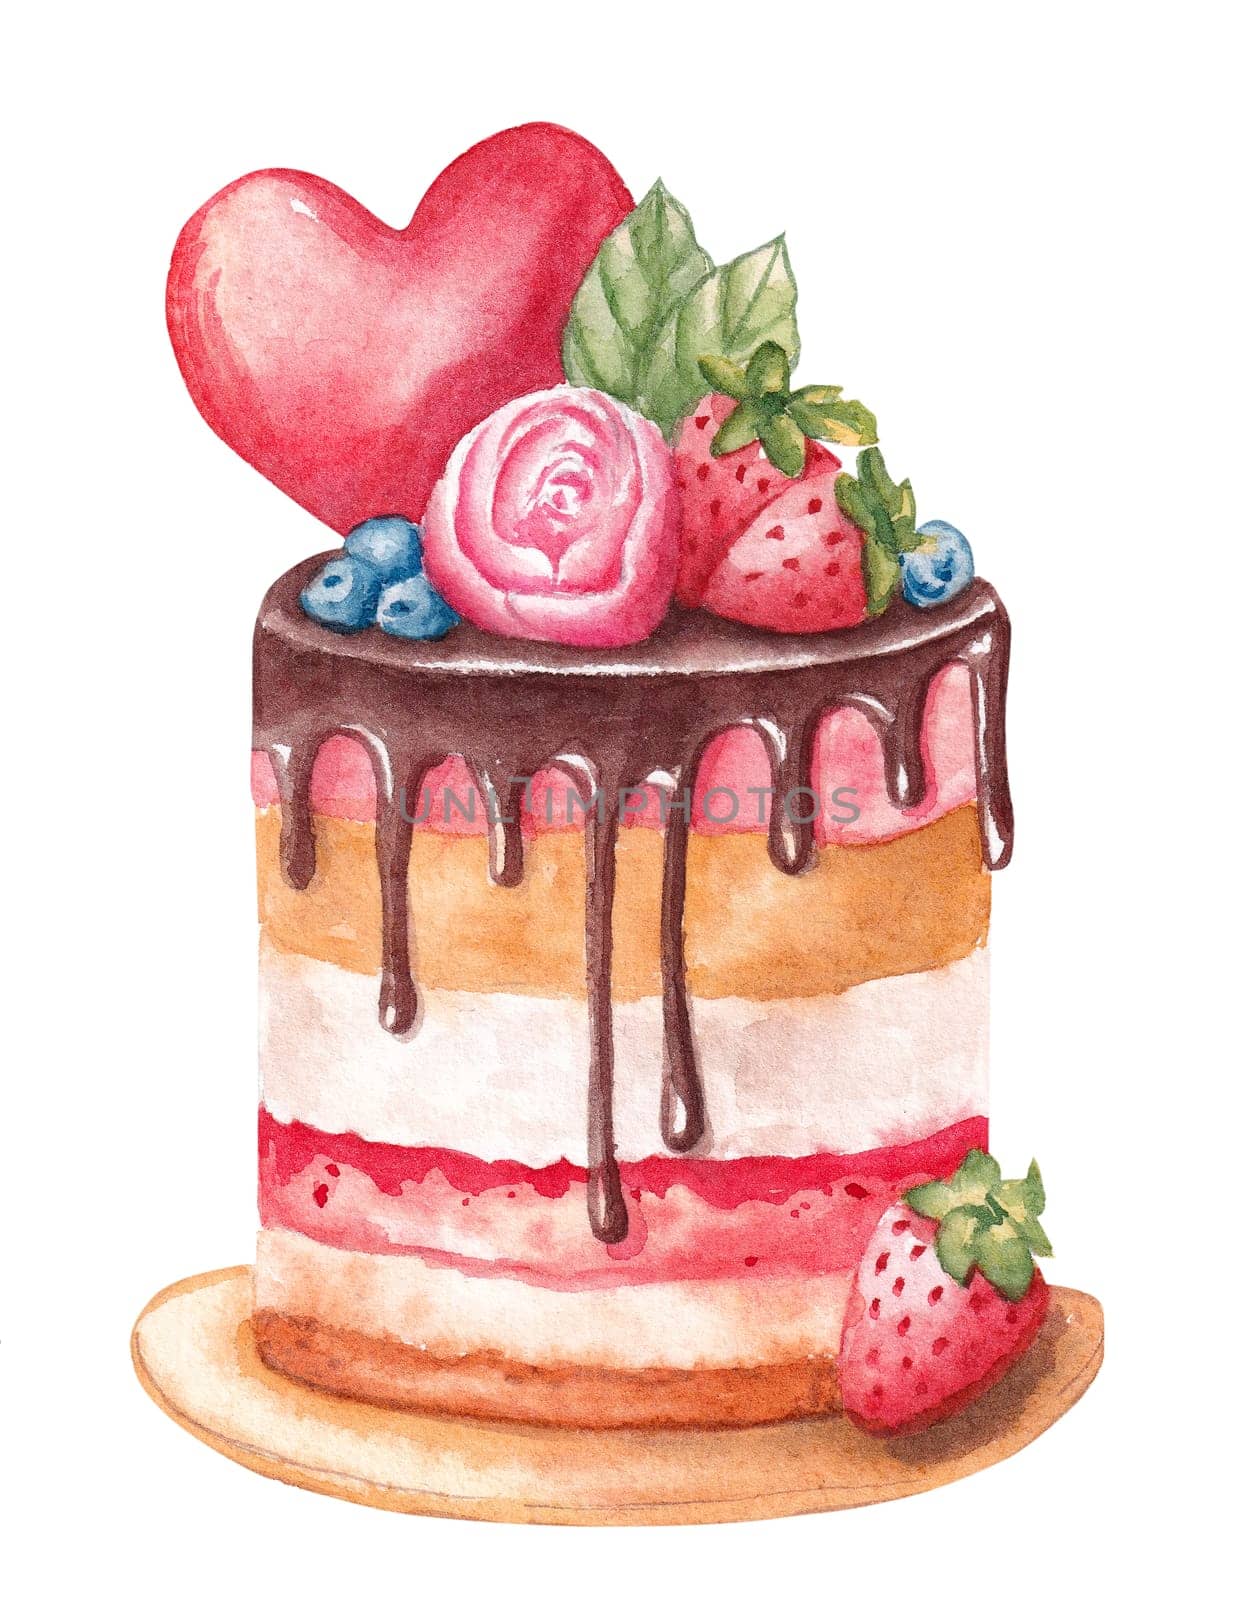 Tasty homemade valentines day cake on white background, hand drawn watercolor illustration